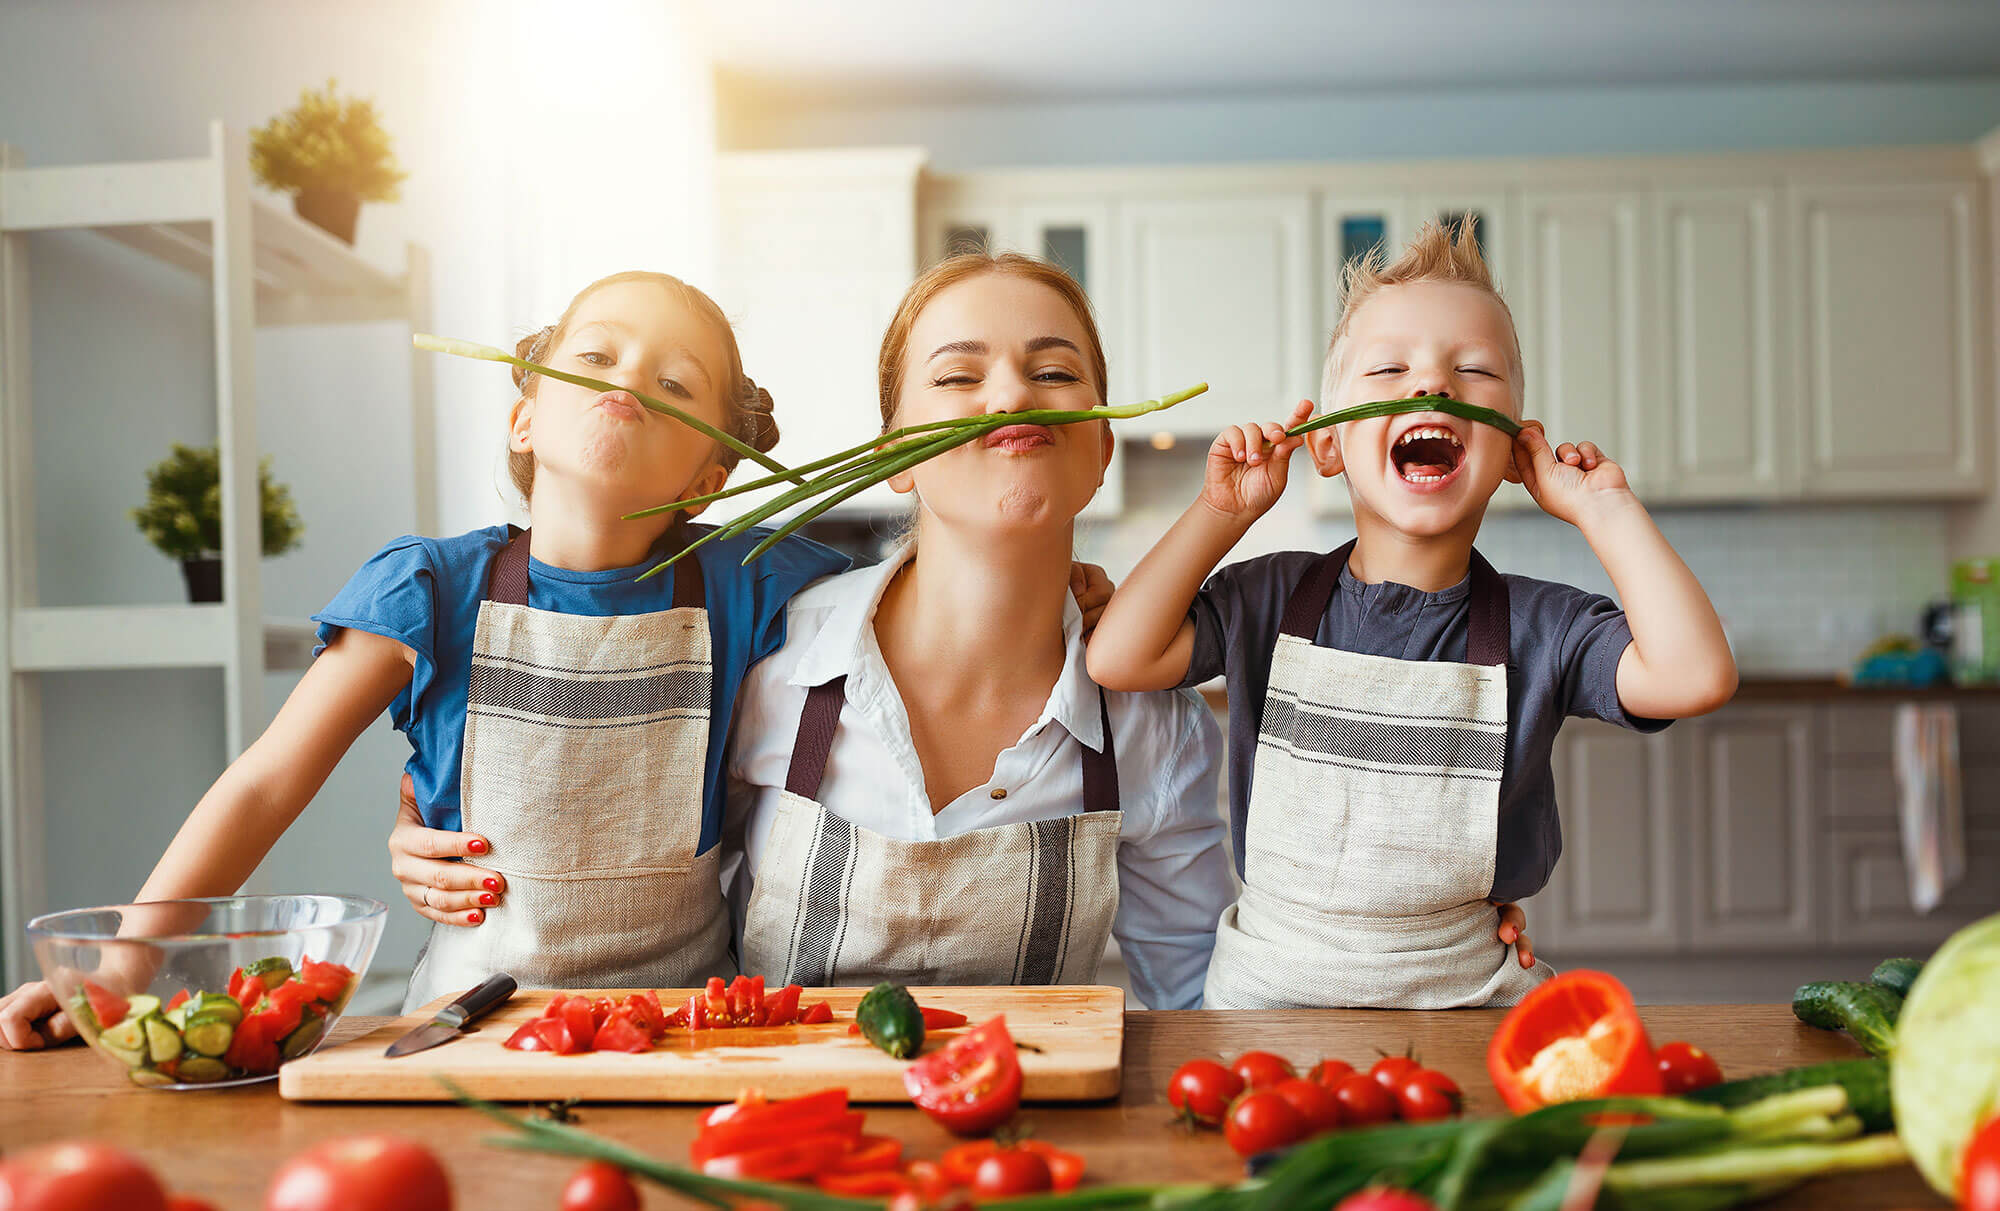 A mother, daughter and son having fun in the kitchen making mustaches with green onion stems